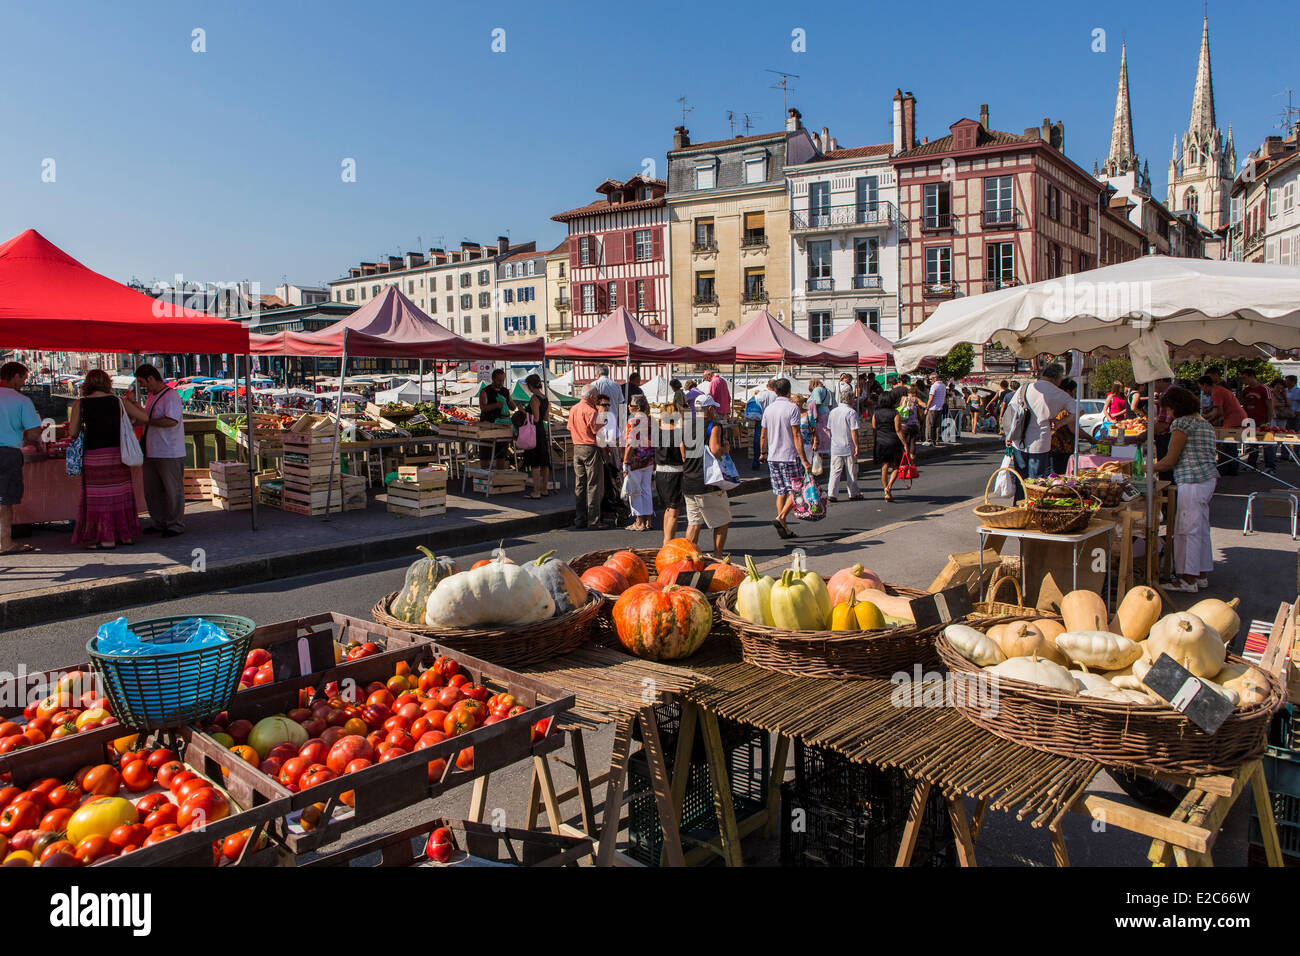 France, Pyrenees Atlantiques, Bayonne, quai Amiral Dubourdieu, market day on the bridge Marengo, traditional architecture on Nive river banks and the arrows of the cathedral Saint Catherine Stock Photo